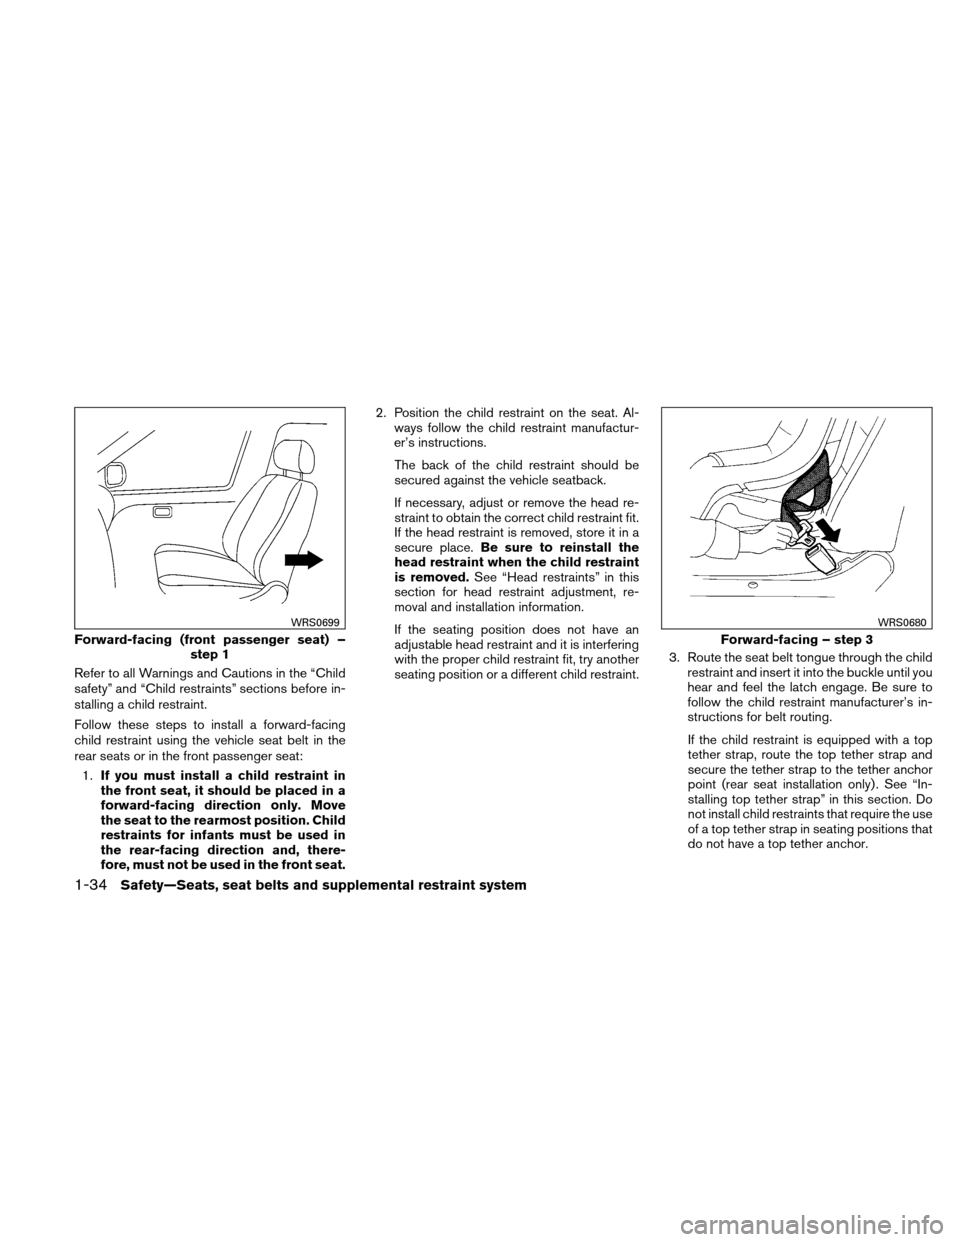 NISSAN VERSA HATCHBACK 2011 1.G Workshop Manual Refer to all Warnings and Cautions in the “Child
safety” and “Child restraints” sections before in-
stalling a child restraint.
Follow these steps to install a forward-facing
child restraint u